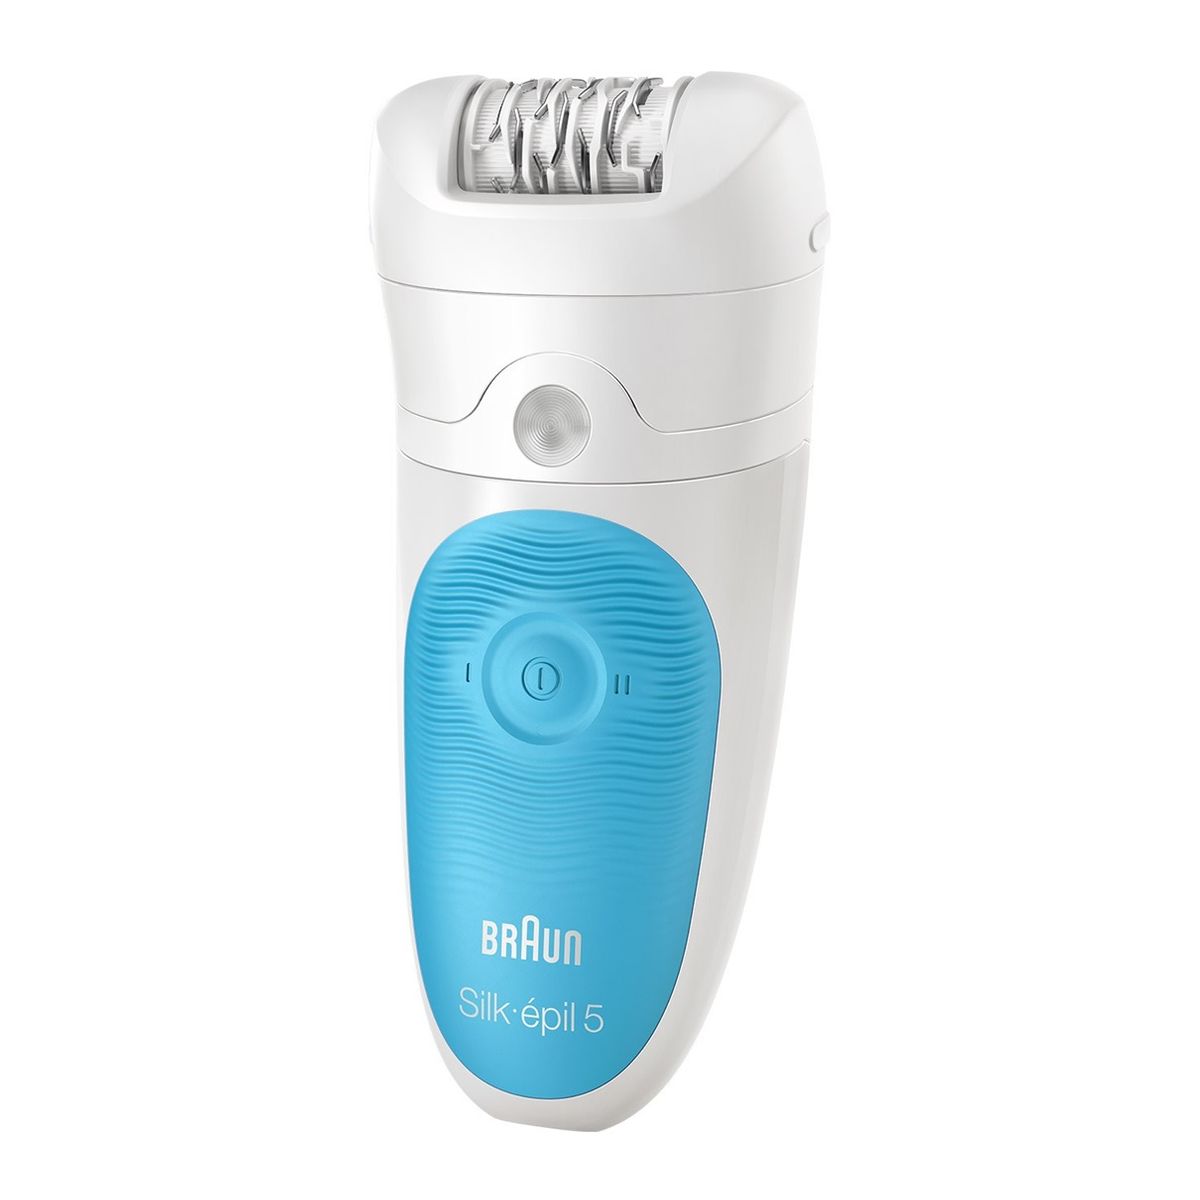 Braun Silk-epil 5 511 hair remover, cordless depilatory Wet & Dry, dry and wet, starter kit with cap, for beginners.